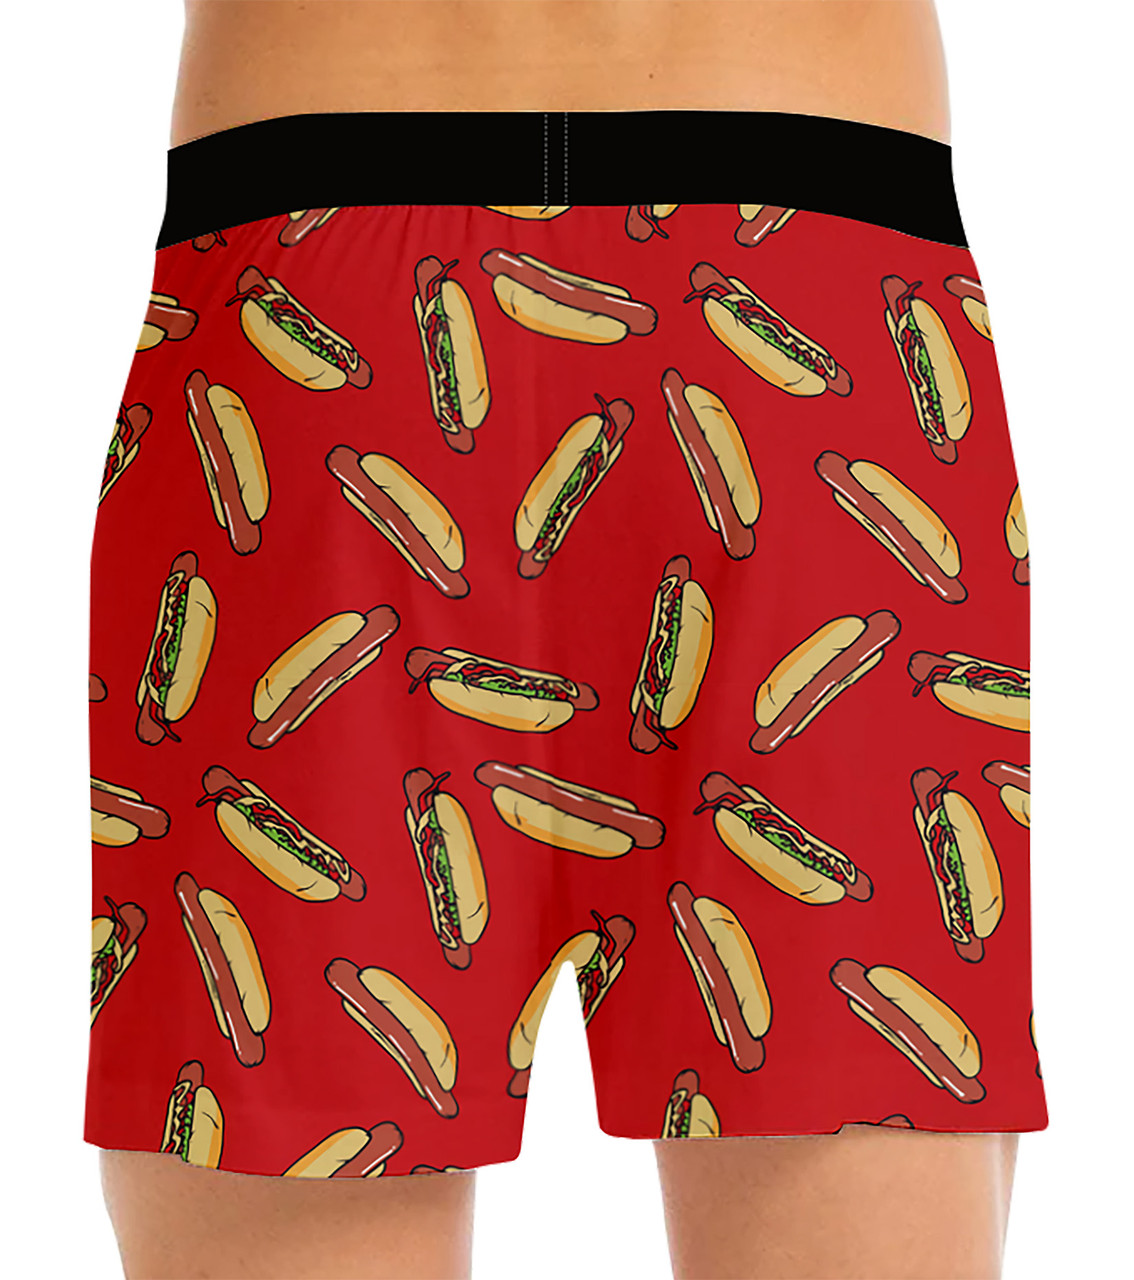 Hot Dogs Boxer Shorts Canada